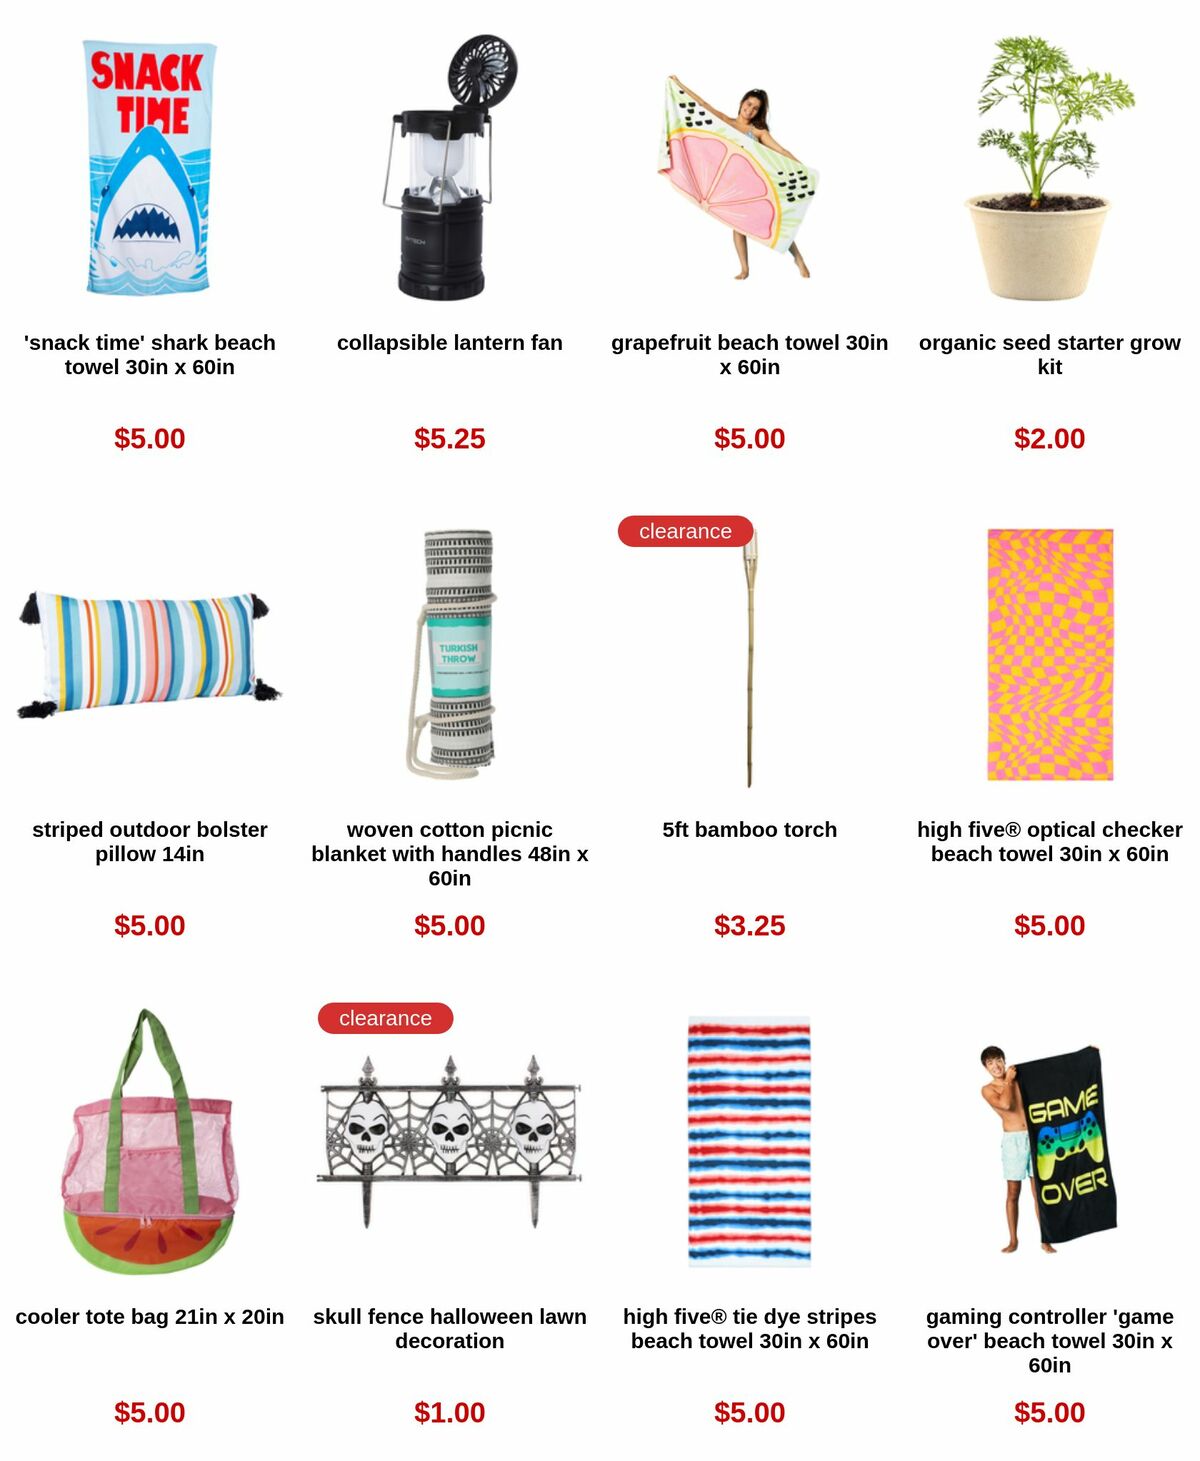 Five Below Weekly Ad from April 20